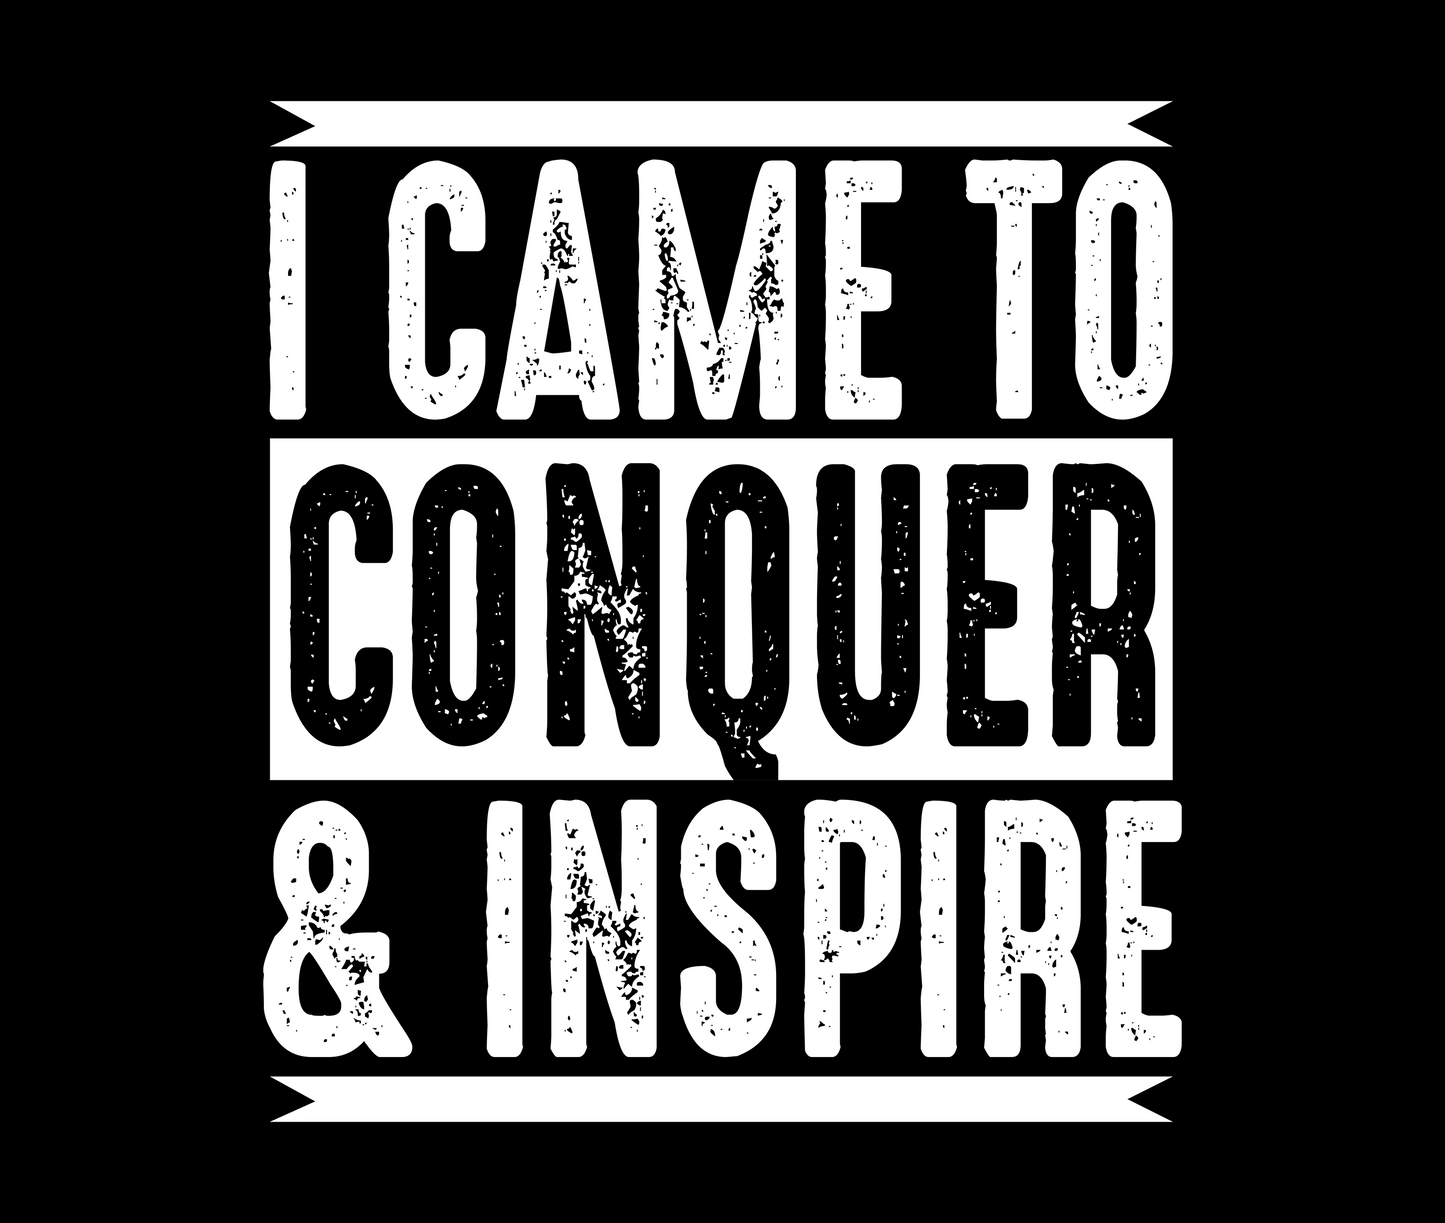 I Came To Conquer & Inspire Mouse Pad